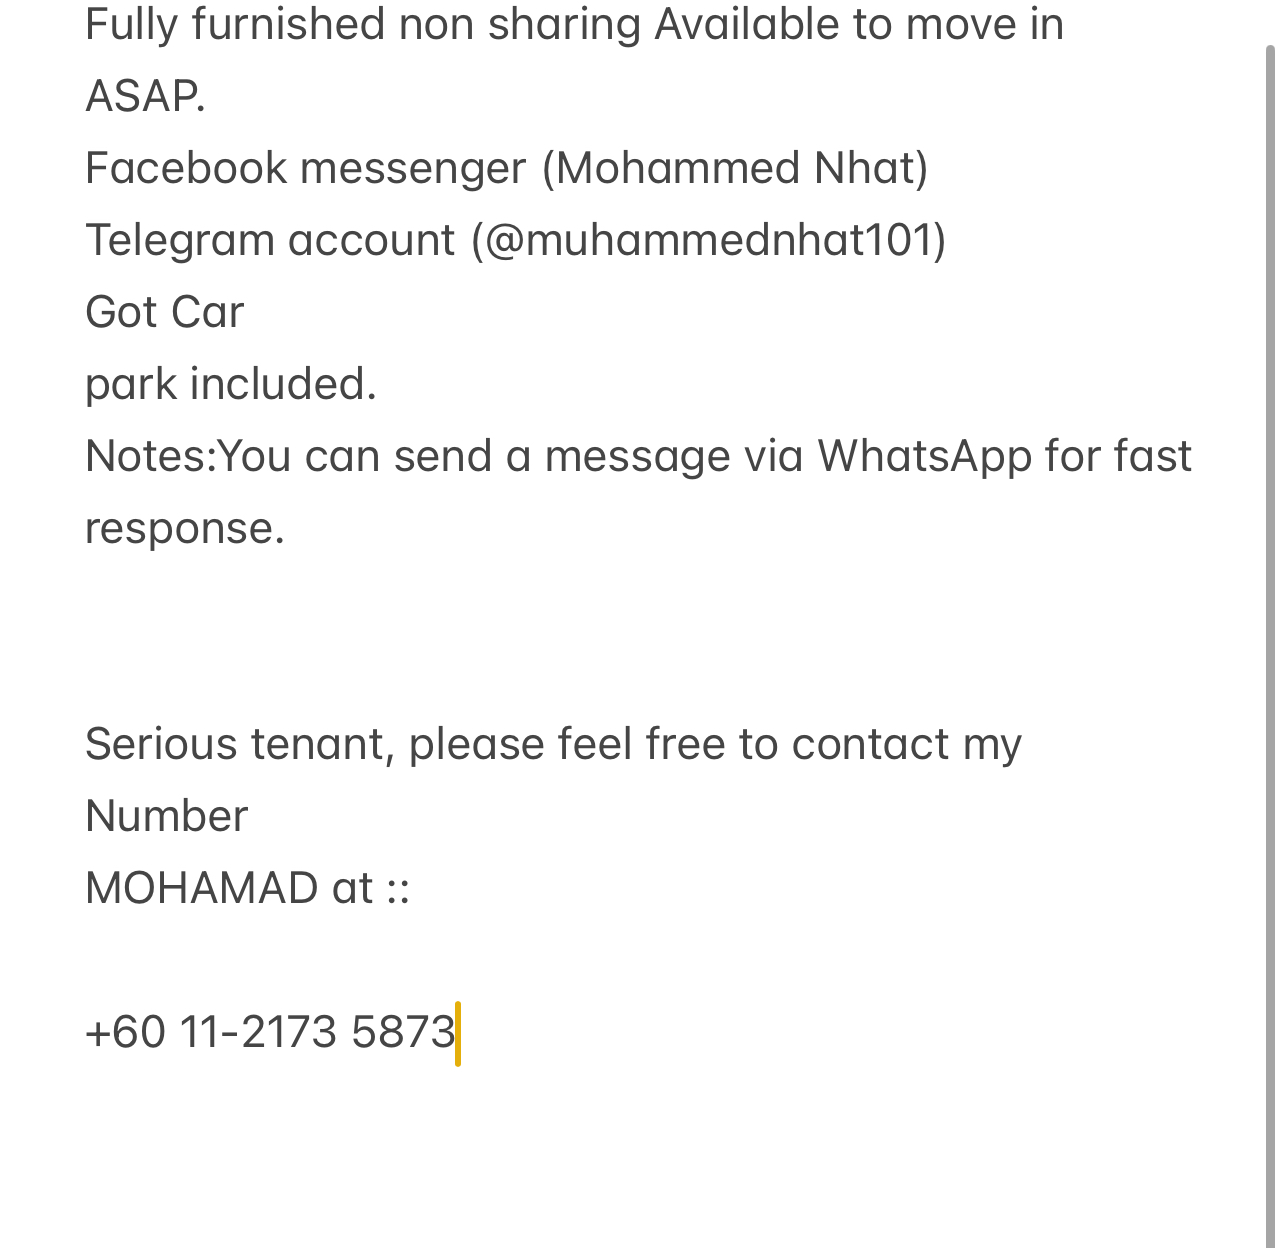 room for rent, studio, q100-2, Send the owner a message on WhatsApp/facebook if you want to RENT the unit facebook (Mohammed Nhat)&Telegram(@muhammednhat101) Fully furnished non sharing :(comfortable)